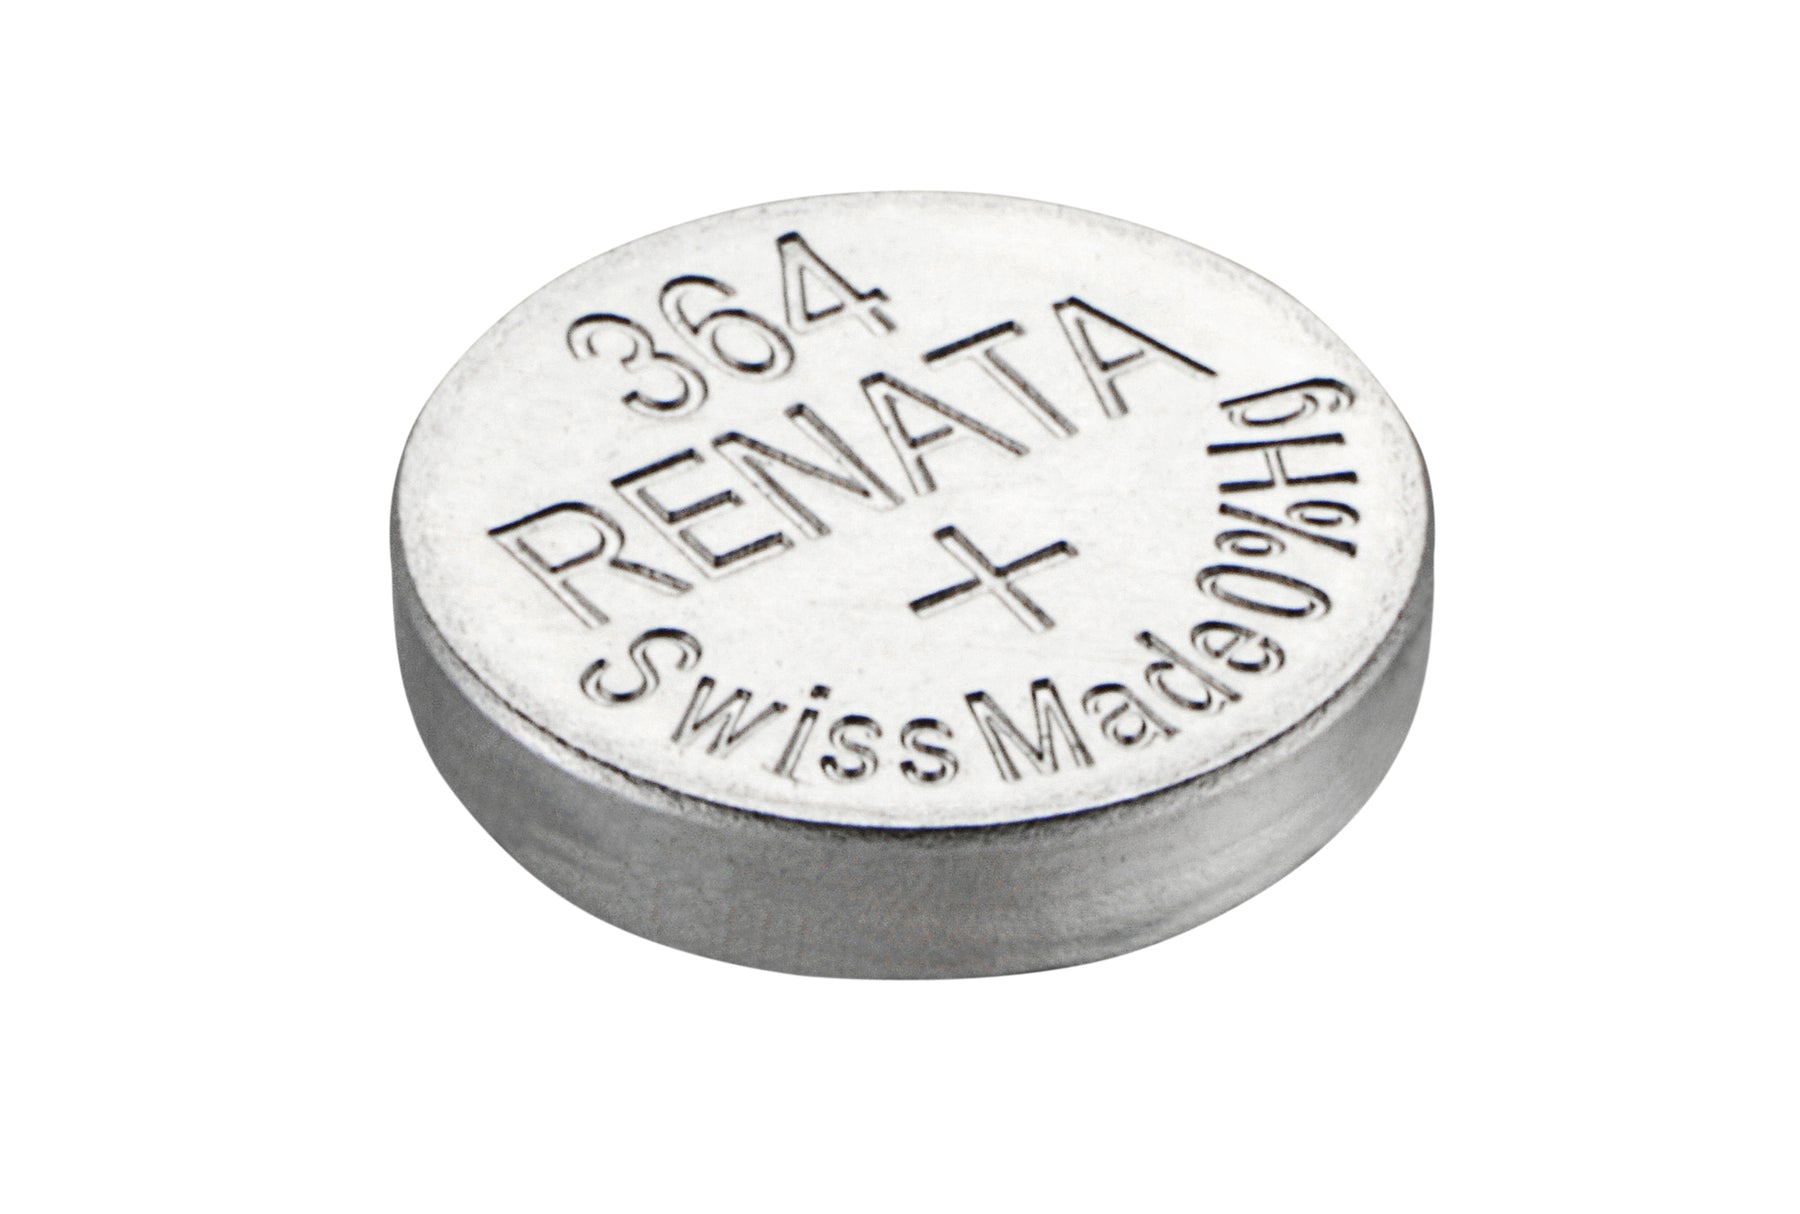 Renata 364 SR621SW Watch Battery Pack of 2 Pieces